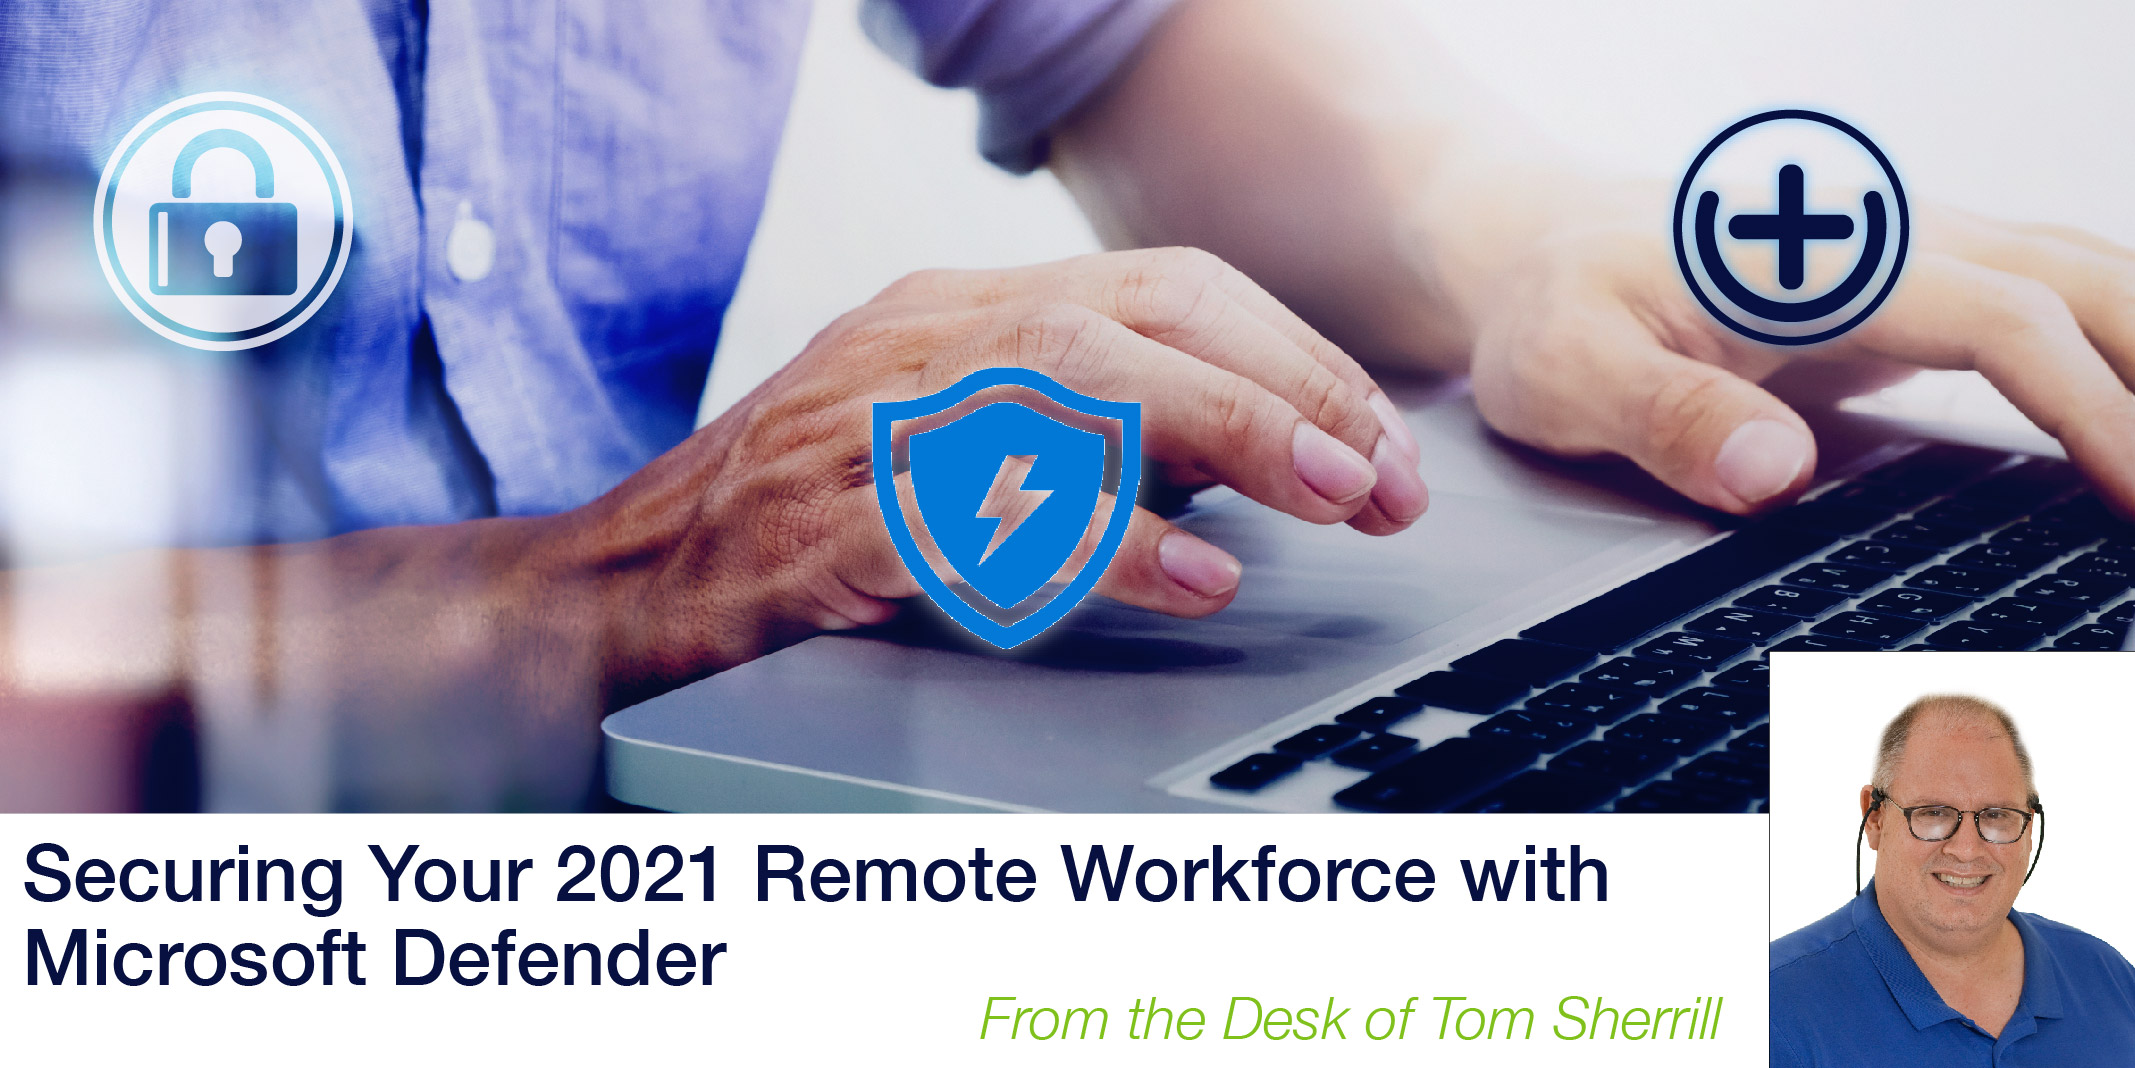 Securing Your 2021 Remote Workforce with Microsoft Defender